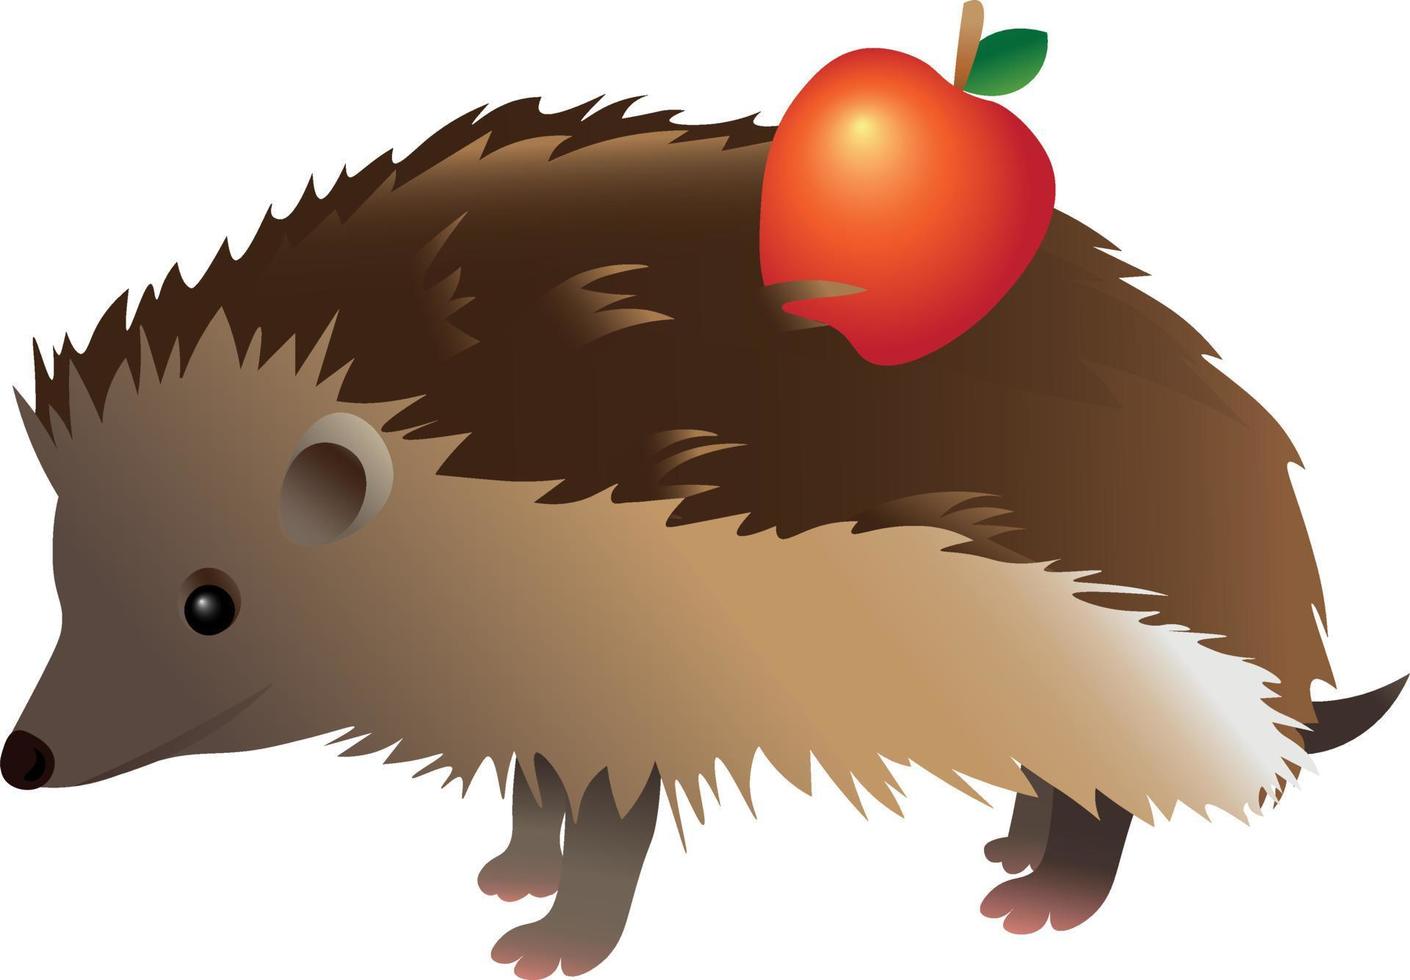 Illustration of Hedgehog with Apple vector